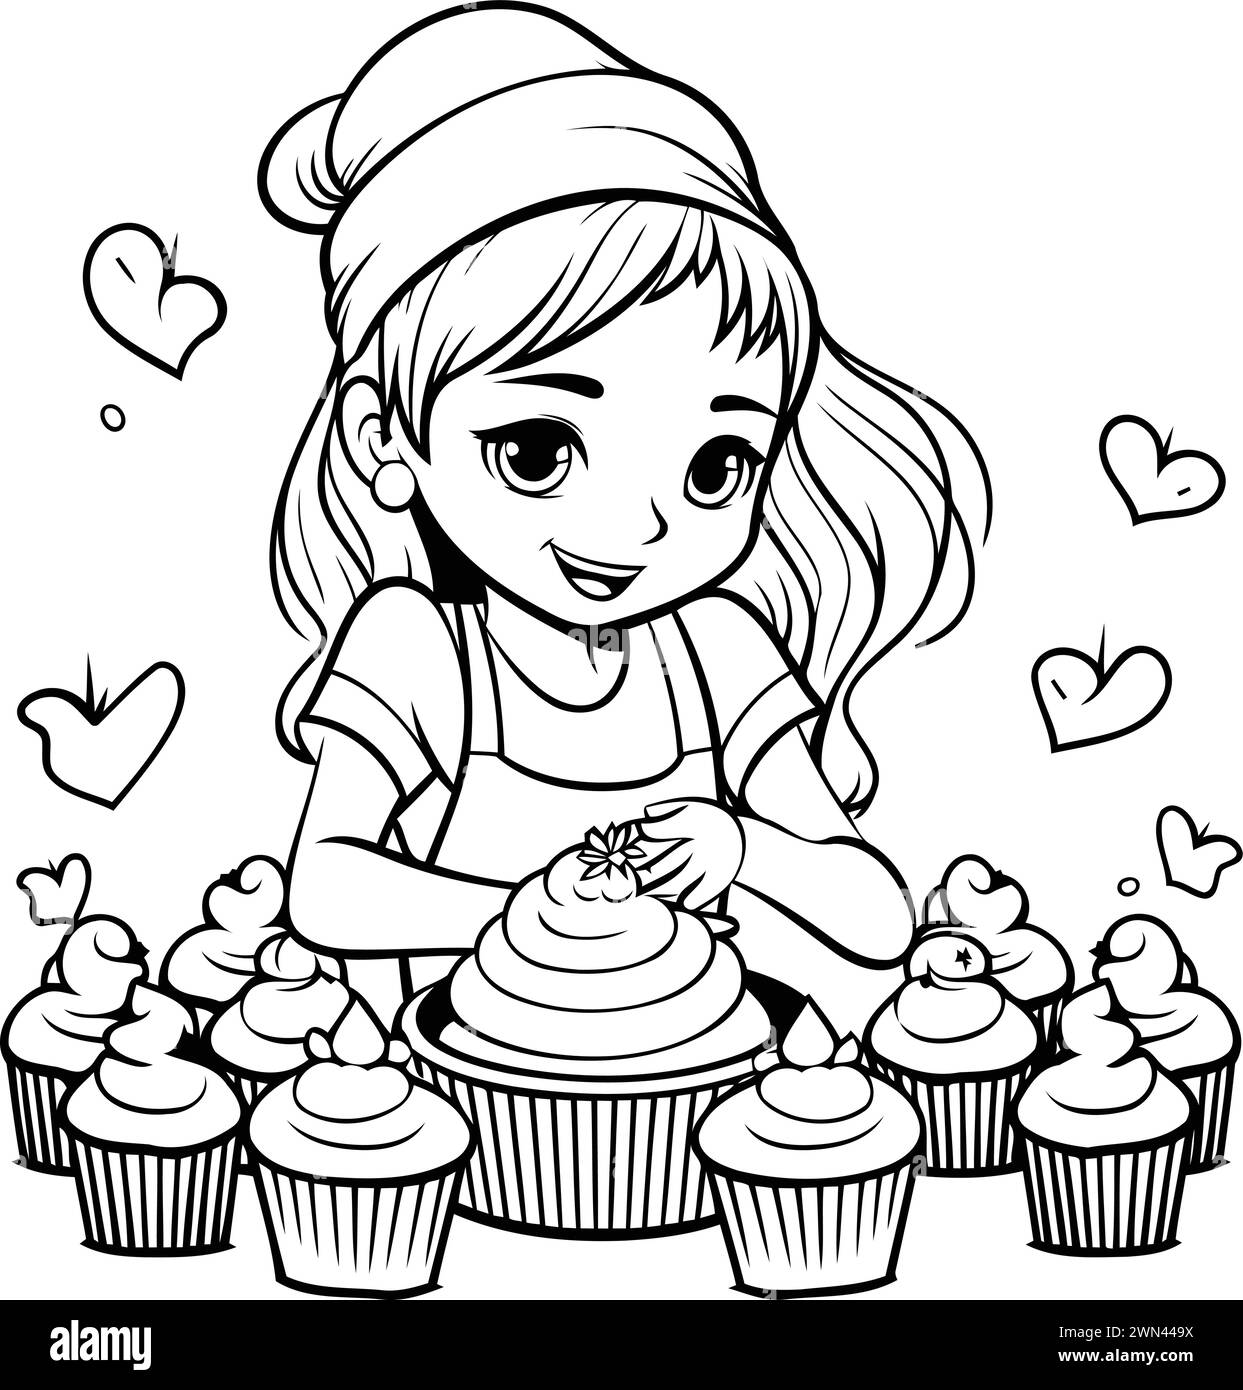 Black and White Cartoon Illustration of Little Girl with Cupcakes for Coloring Book Stock Vector